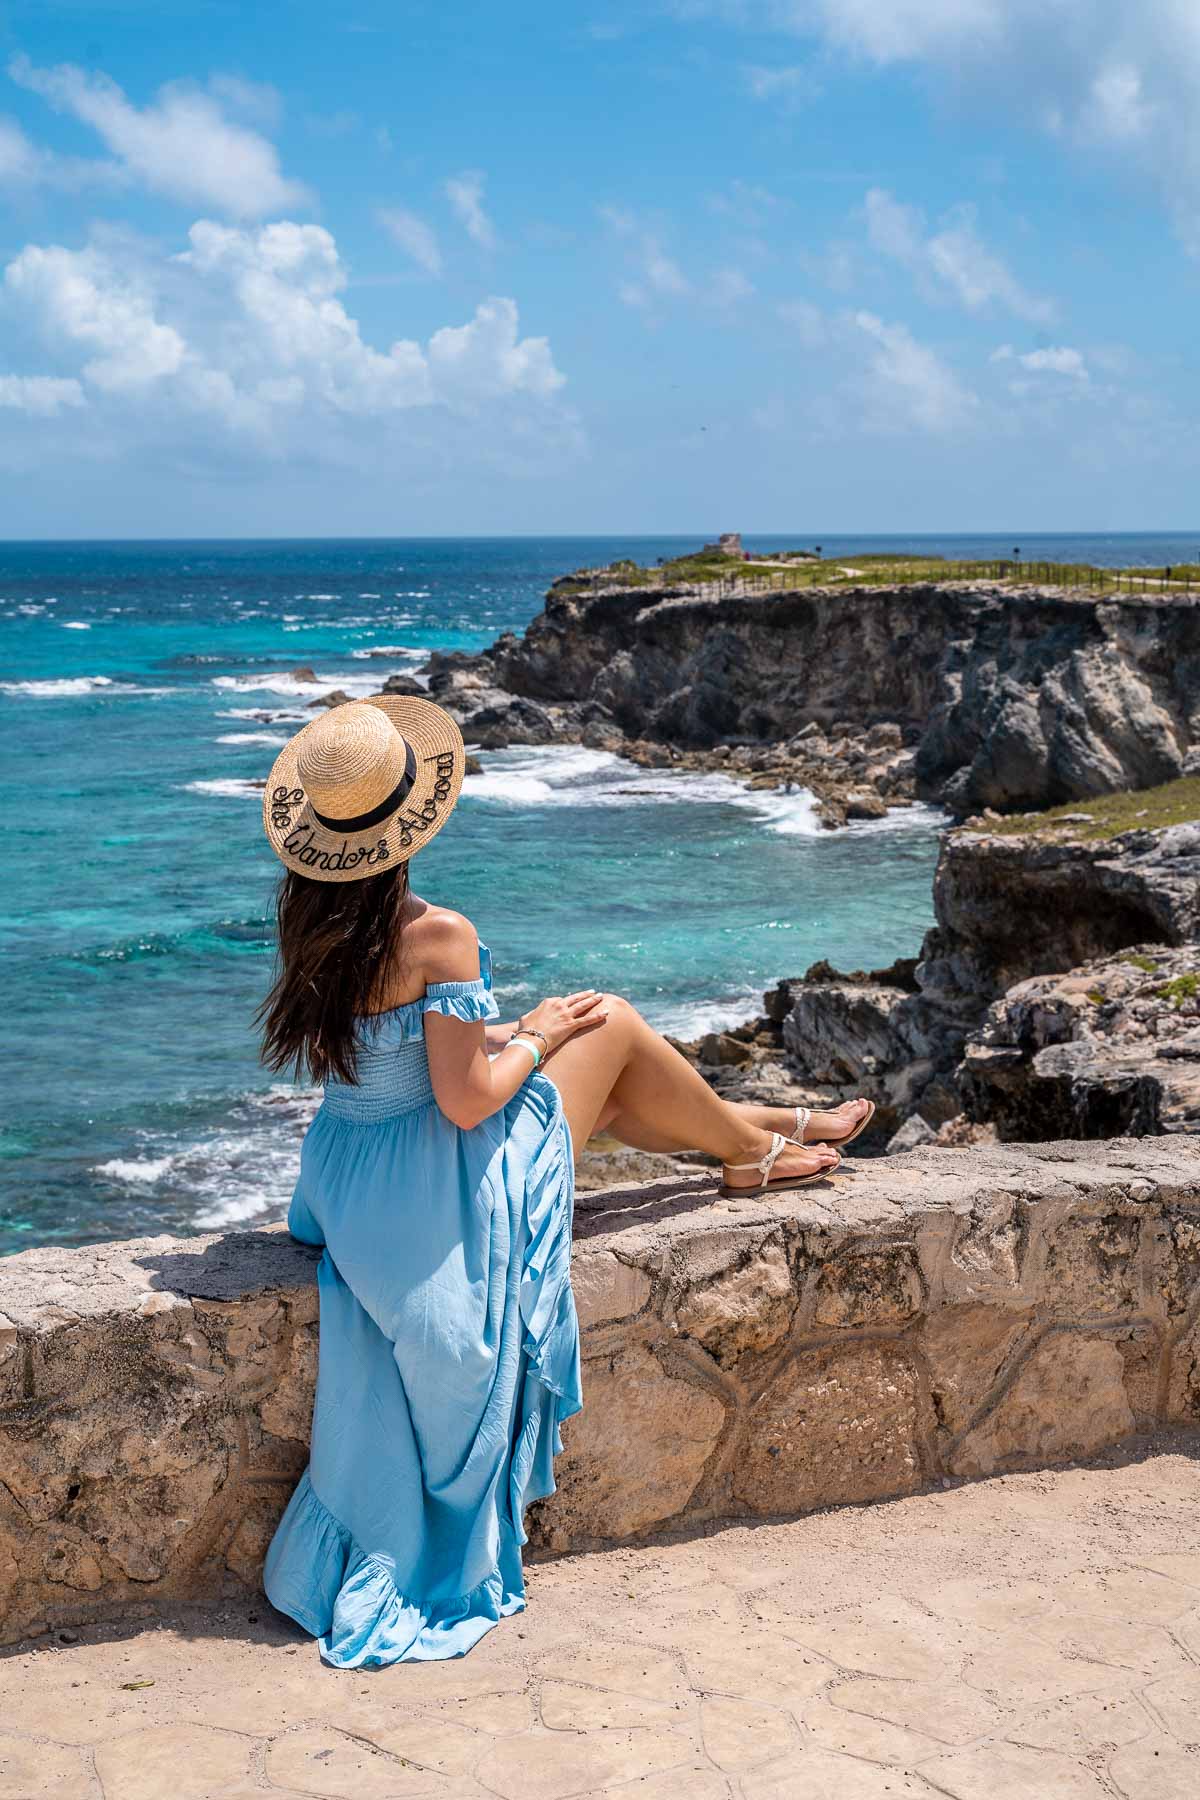 Girl in blue dress at Punta Sur on Isla Mujeres, Mexico